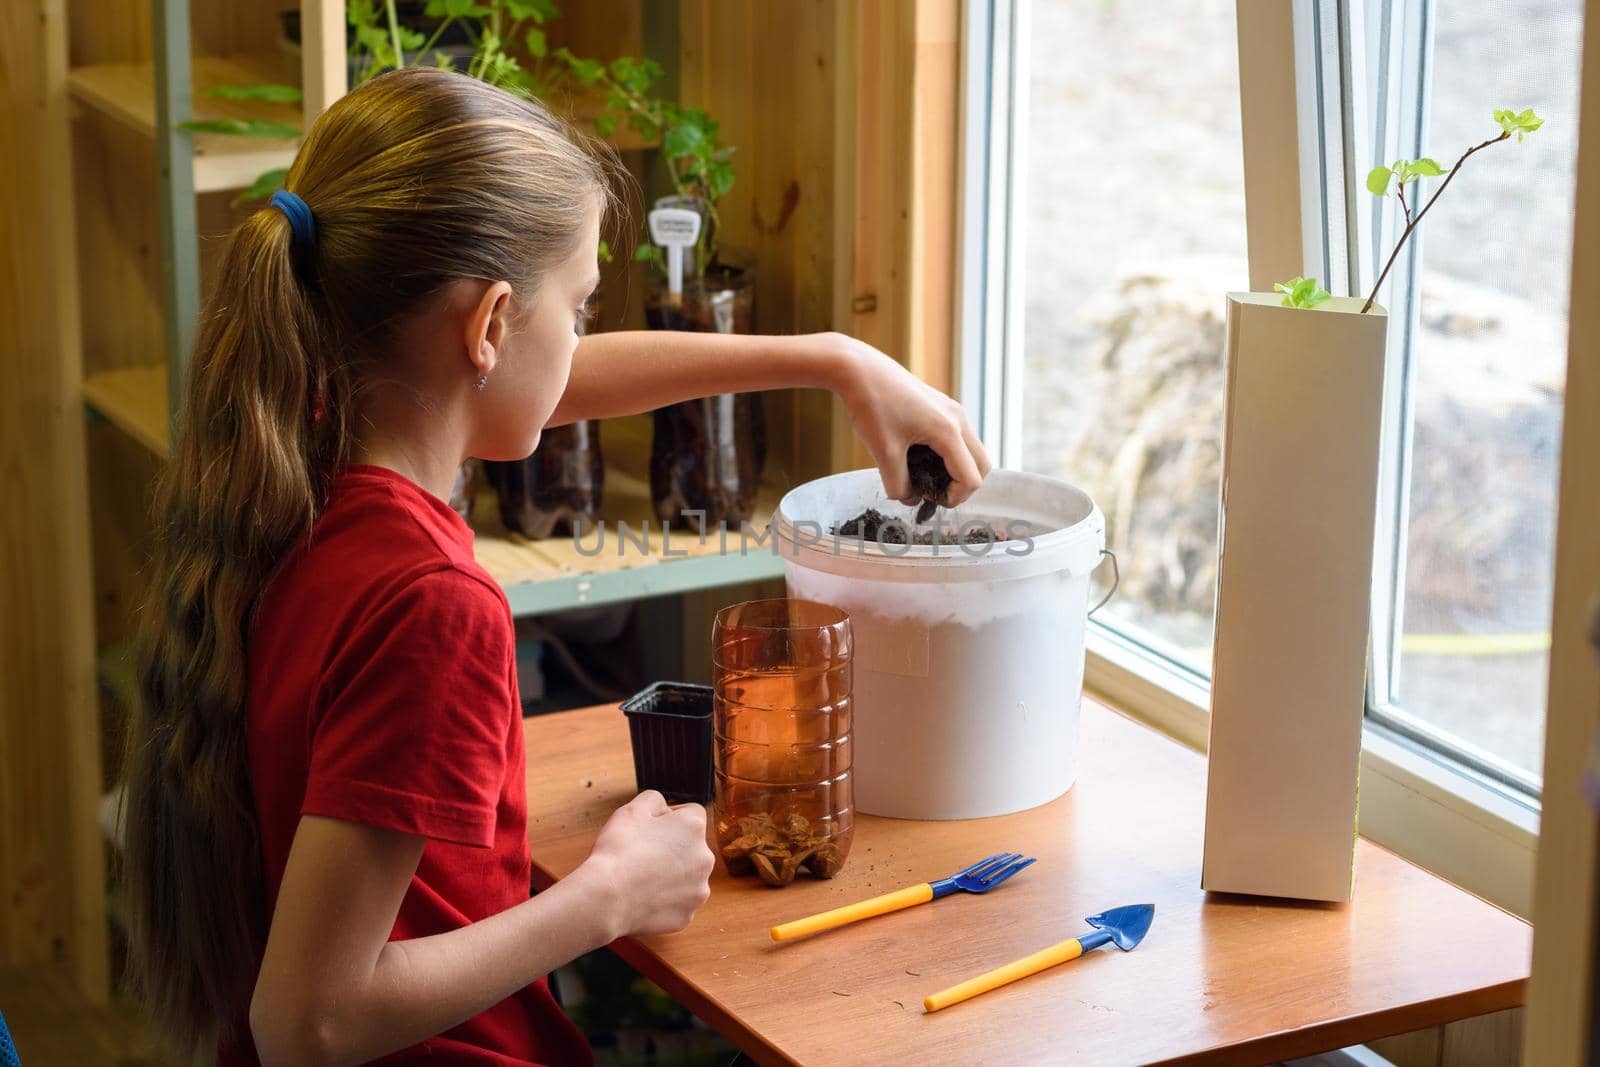 Girl pouring soil into a pot for replanting garden plants